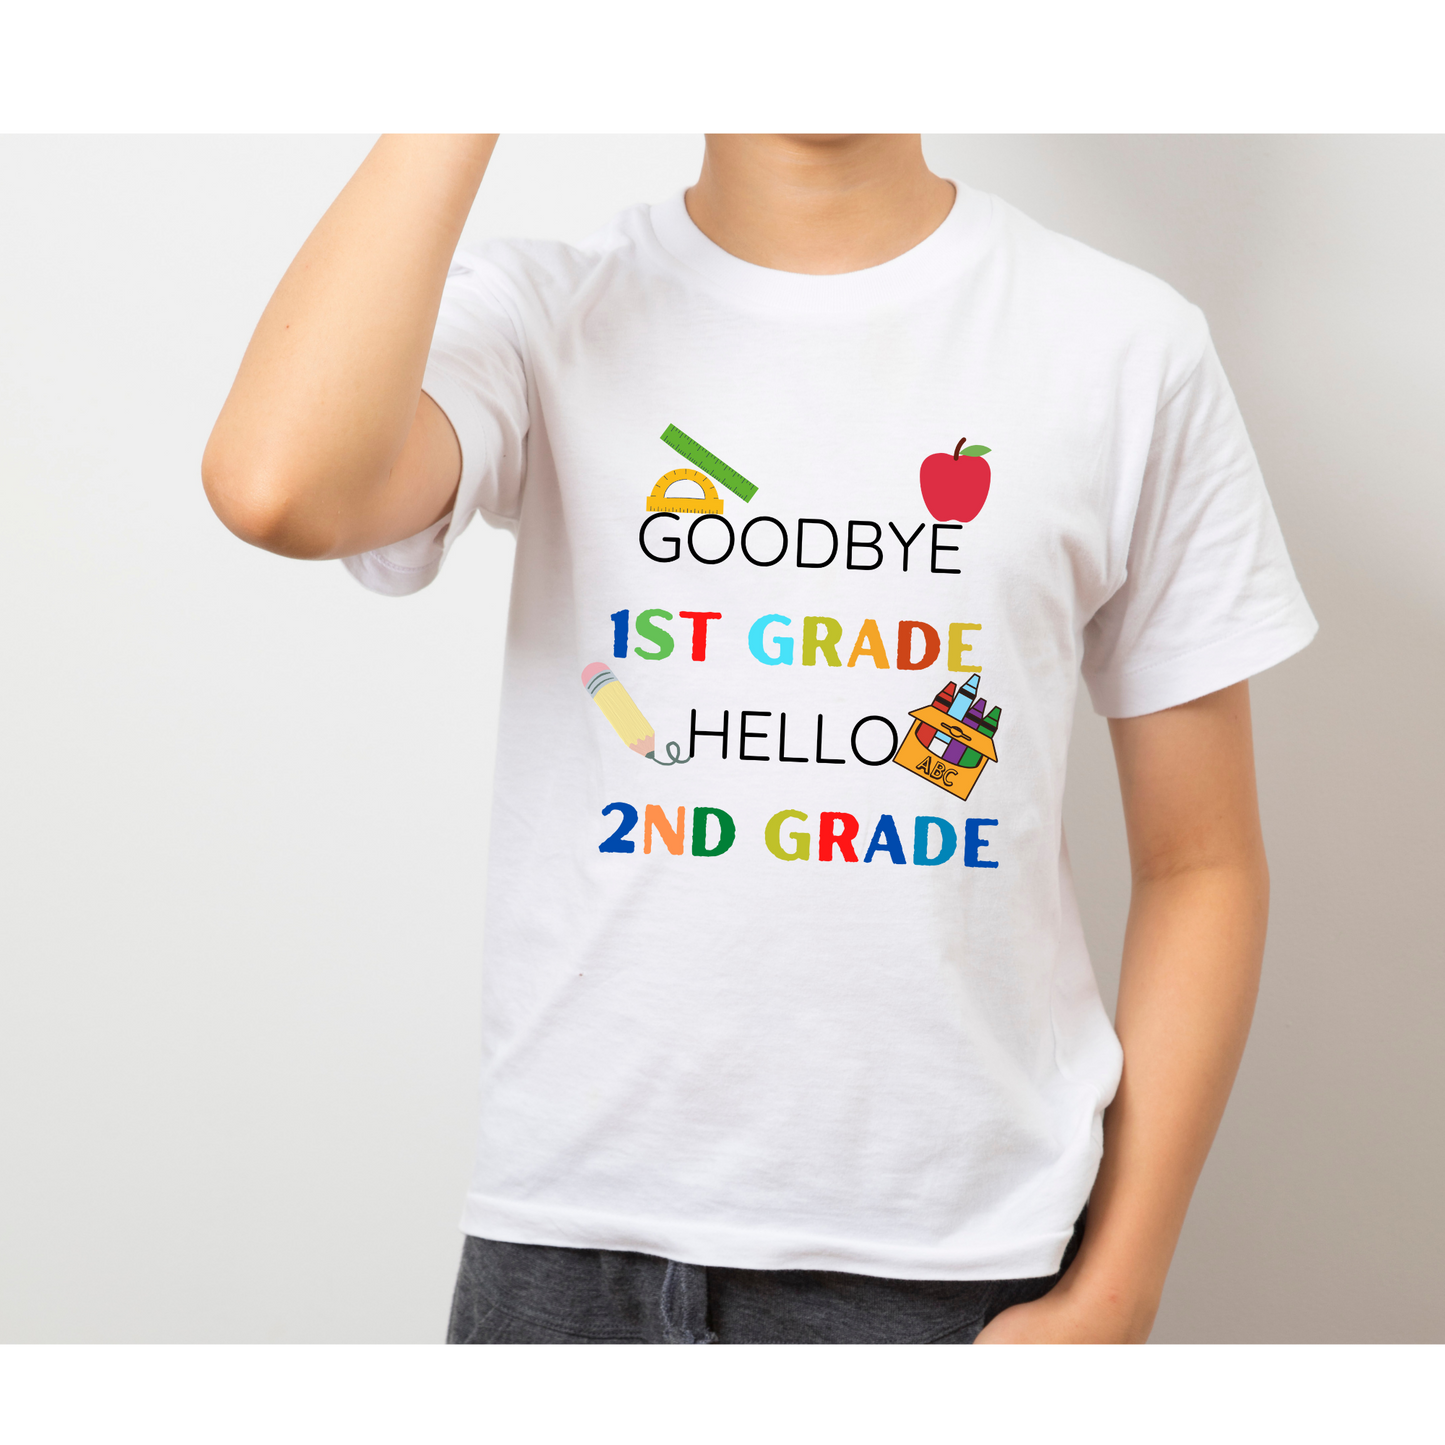 First Day of School T-shirt for kids